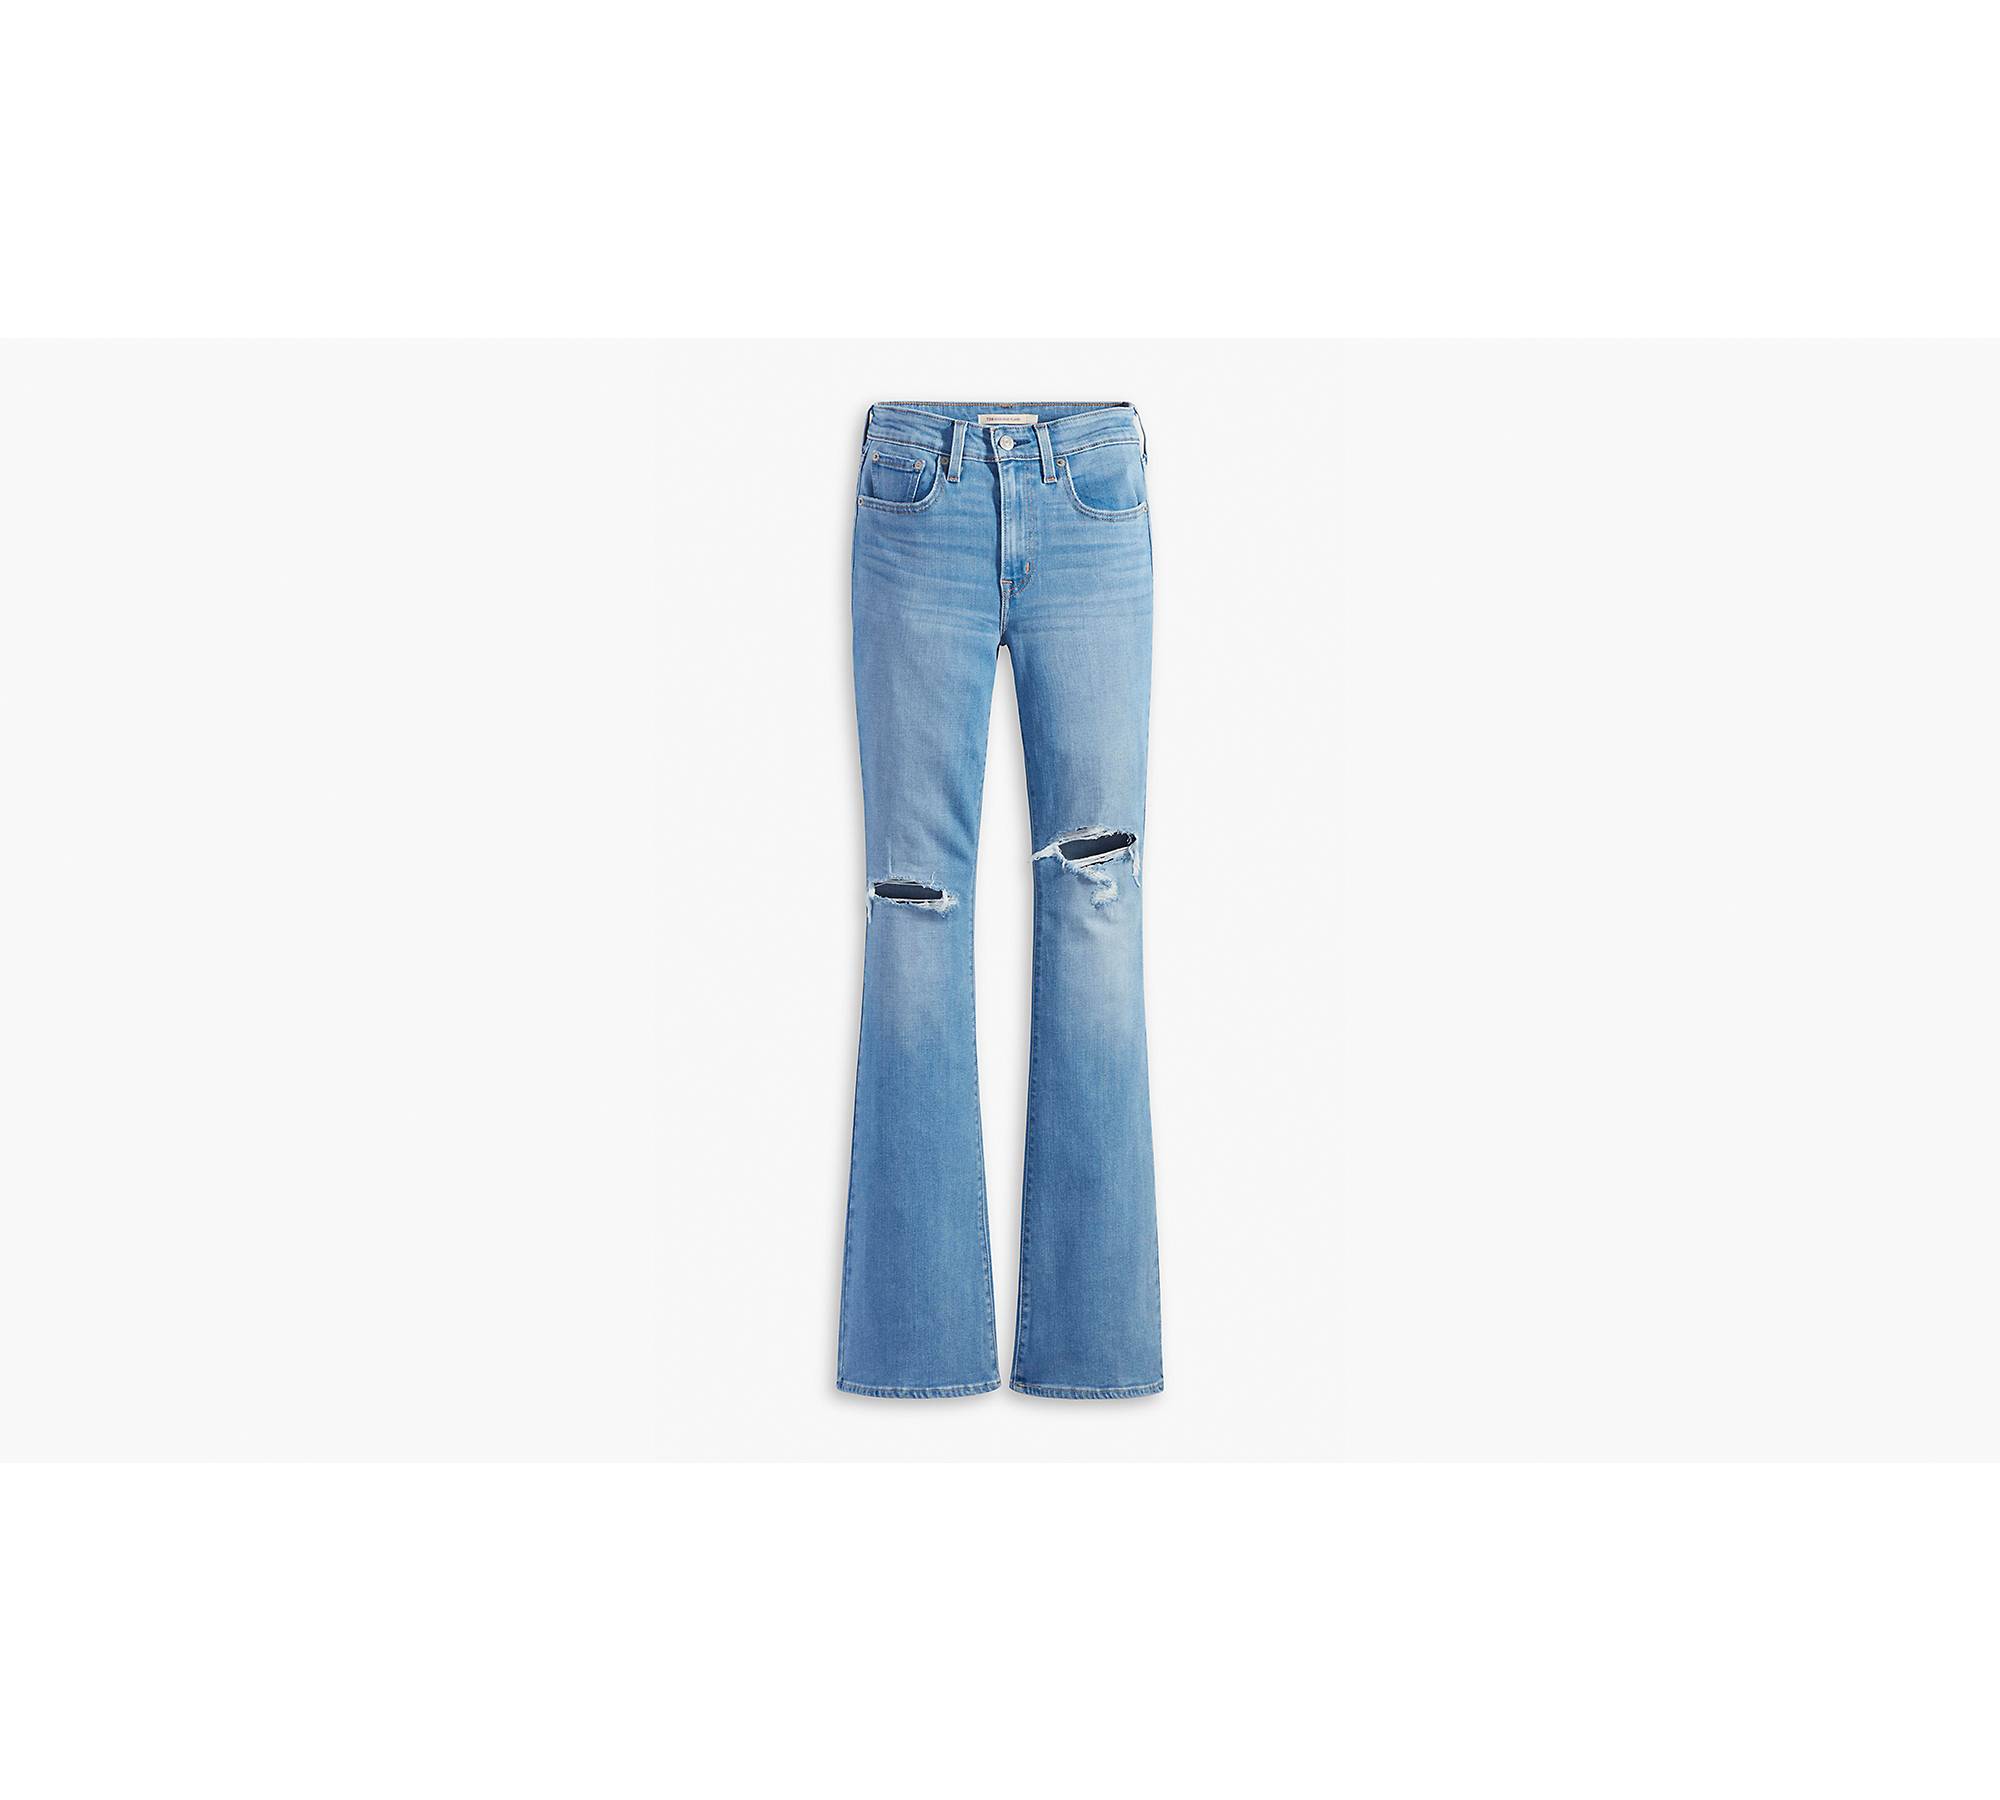 Levis Womens 726 High Rise Flare Jeans, (New) Lets Talk, 24 Short